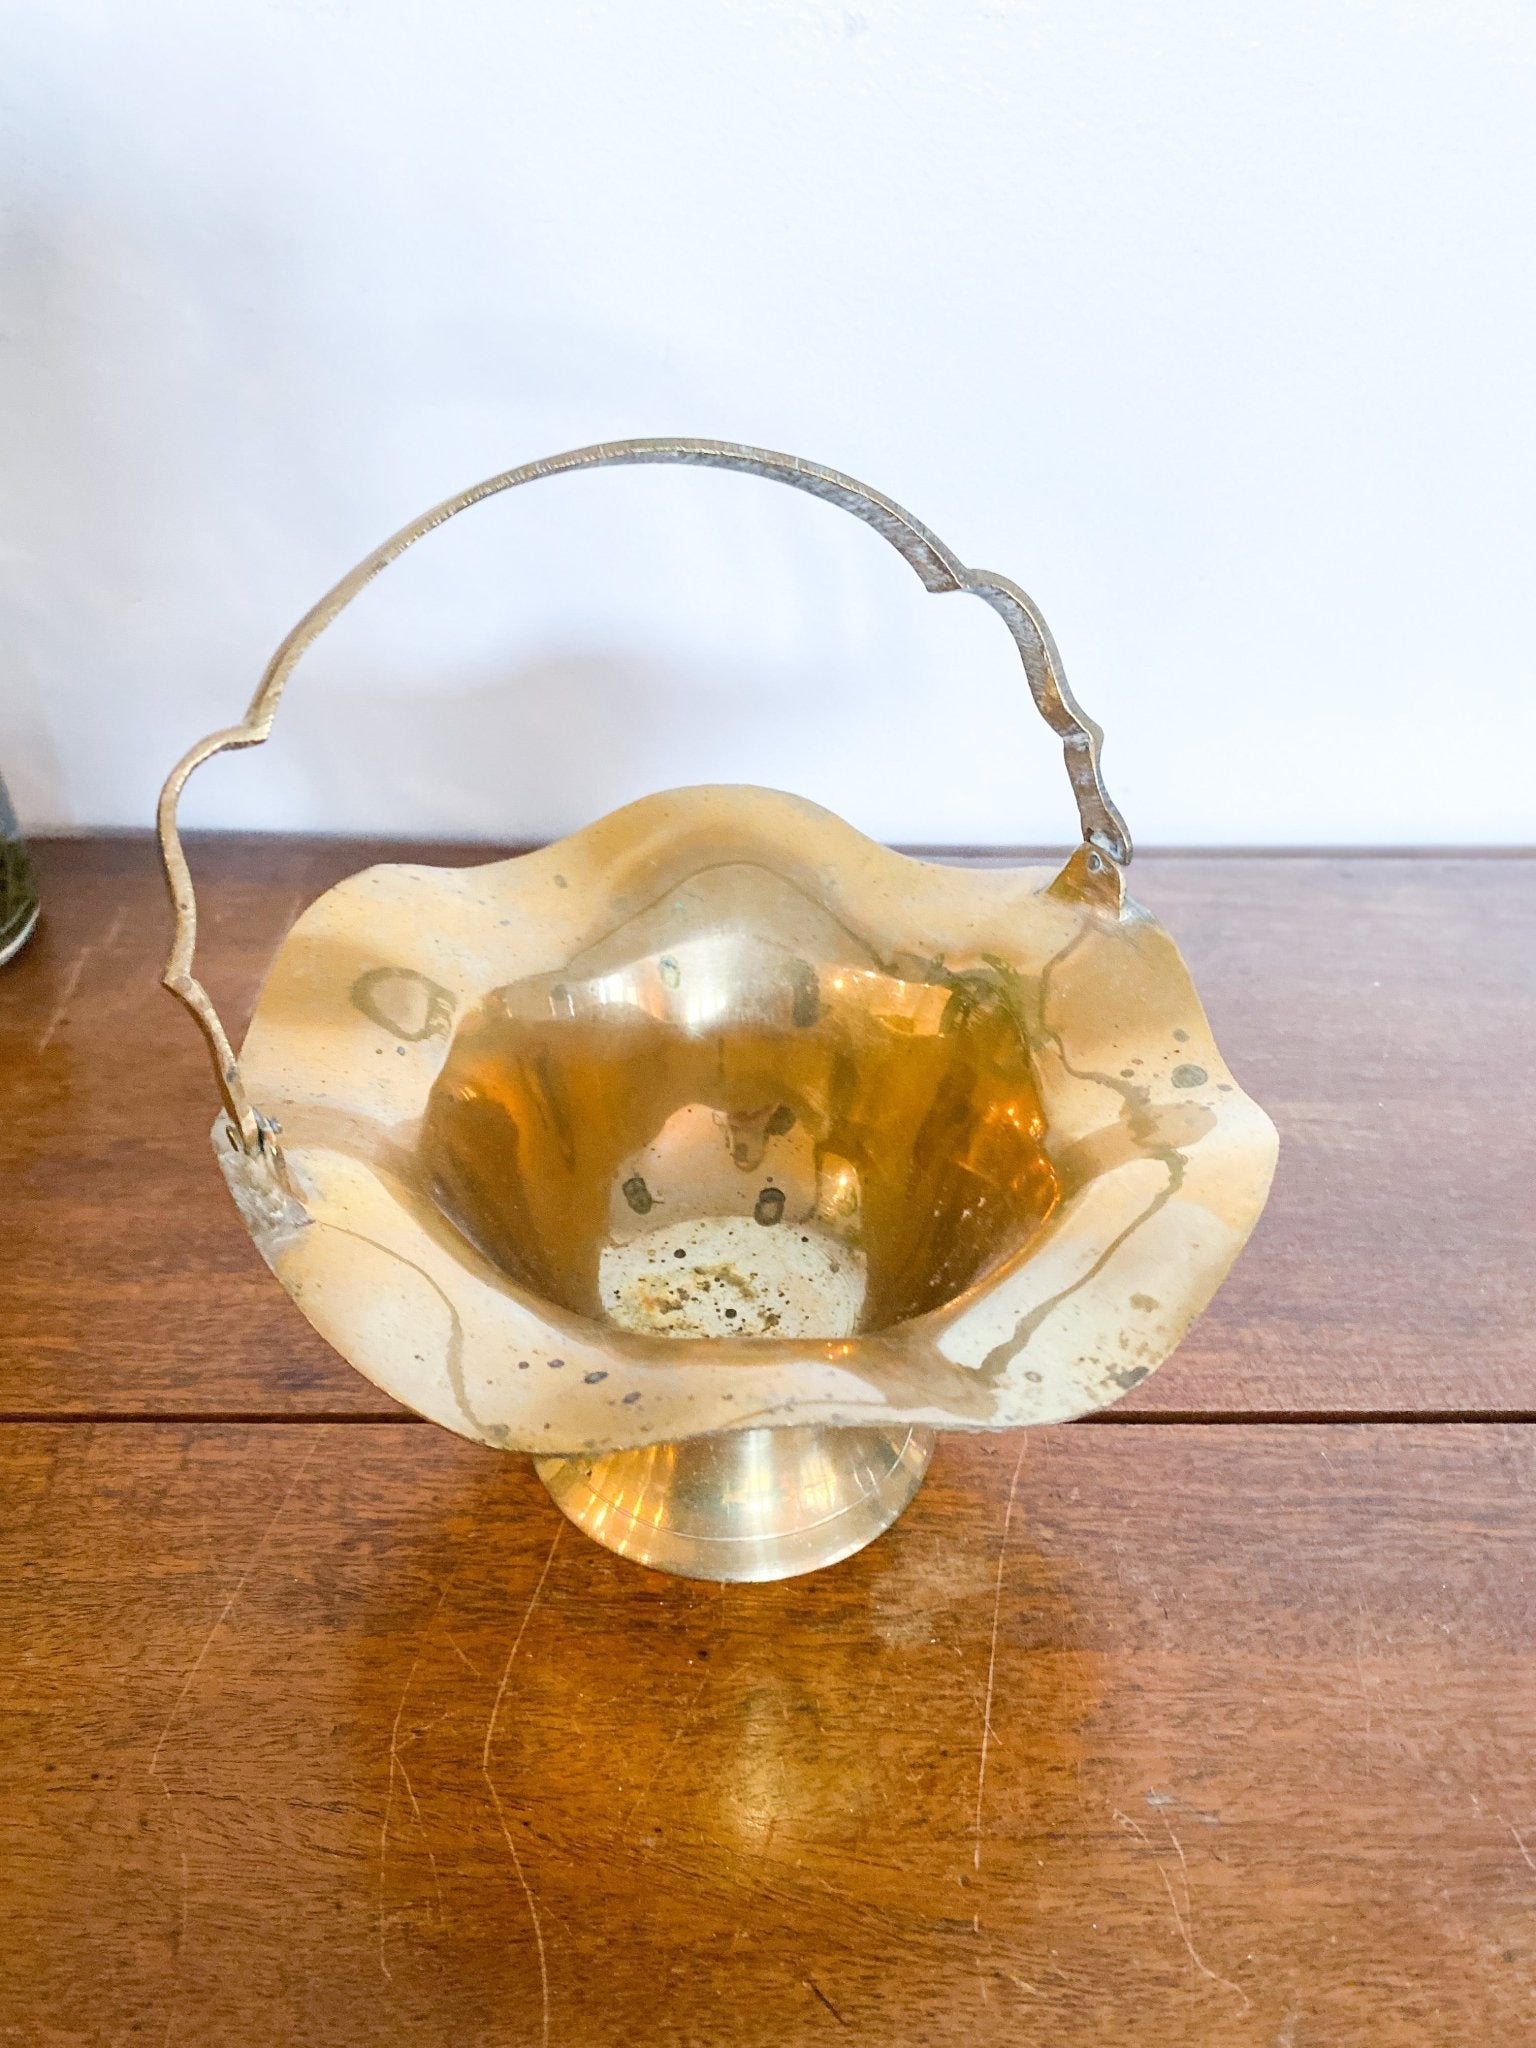 Brass Bowl with Handle - Perth Market